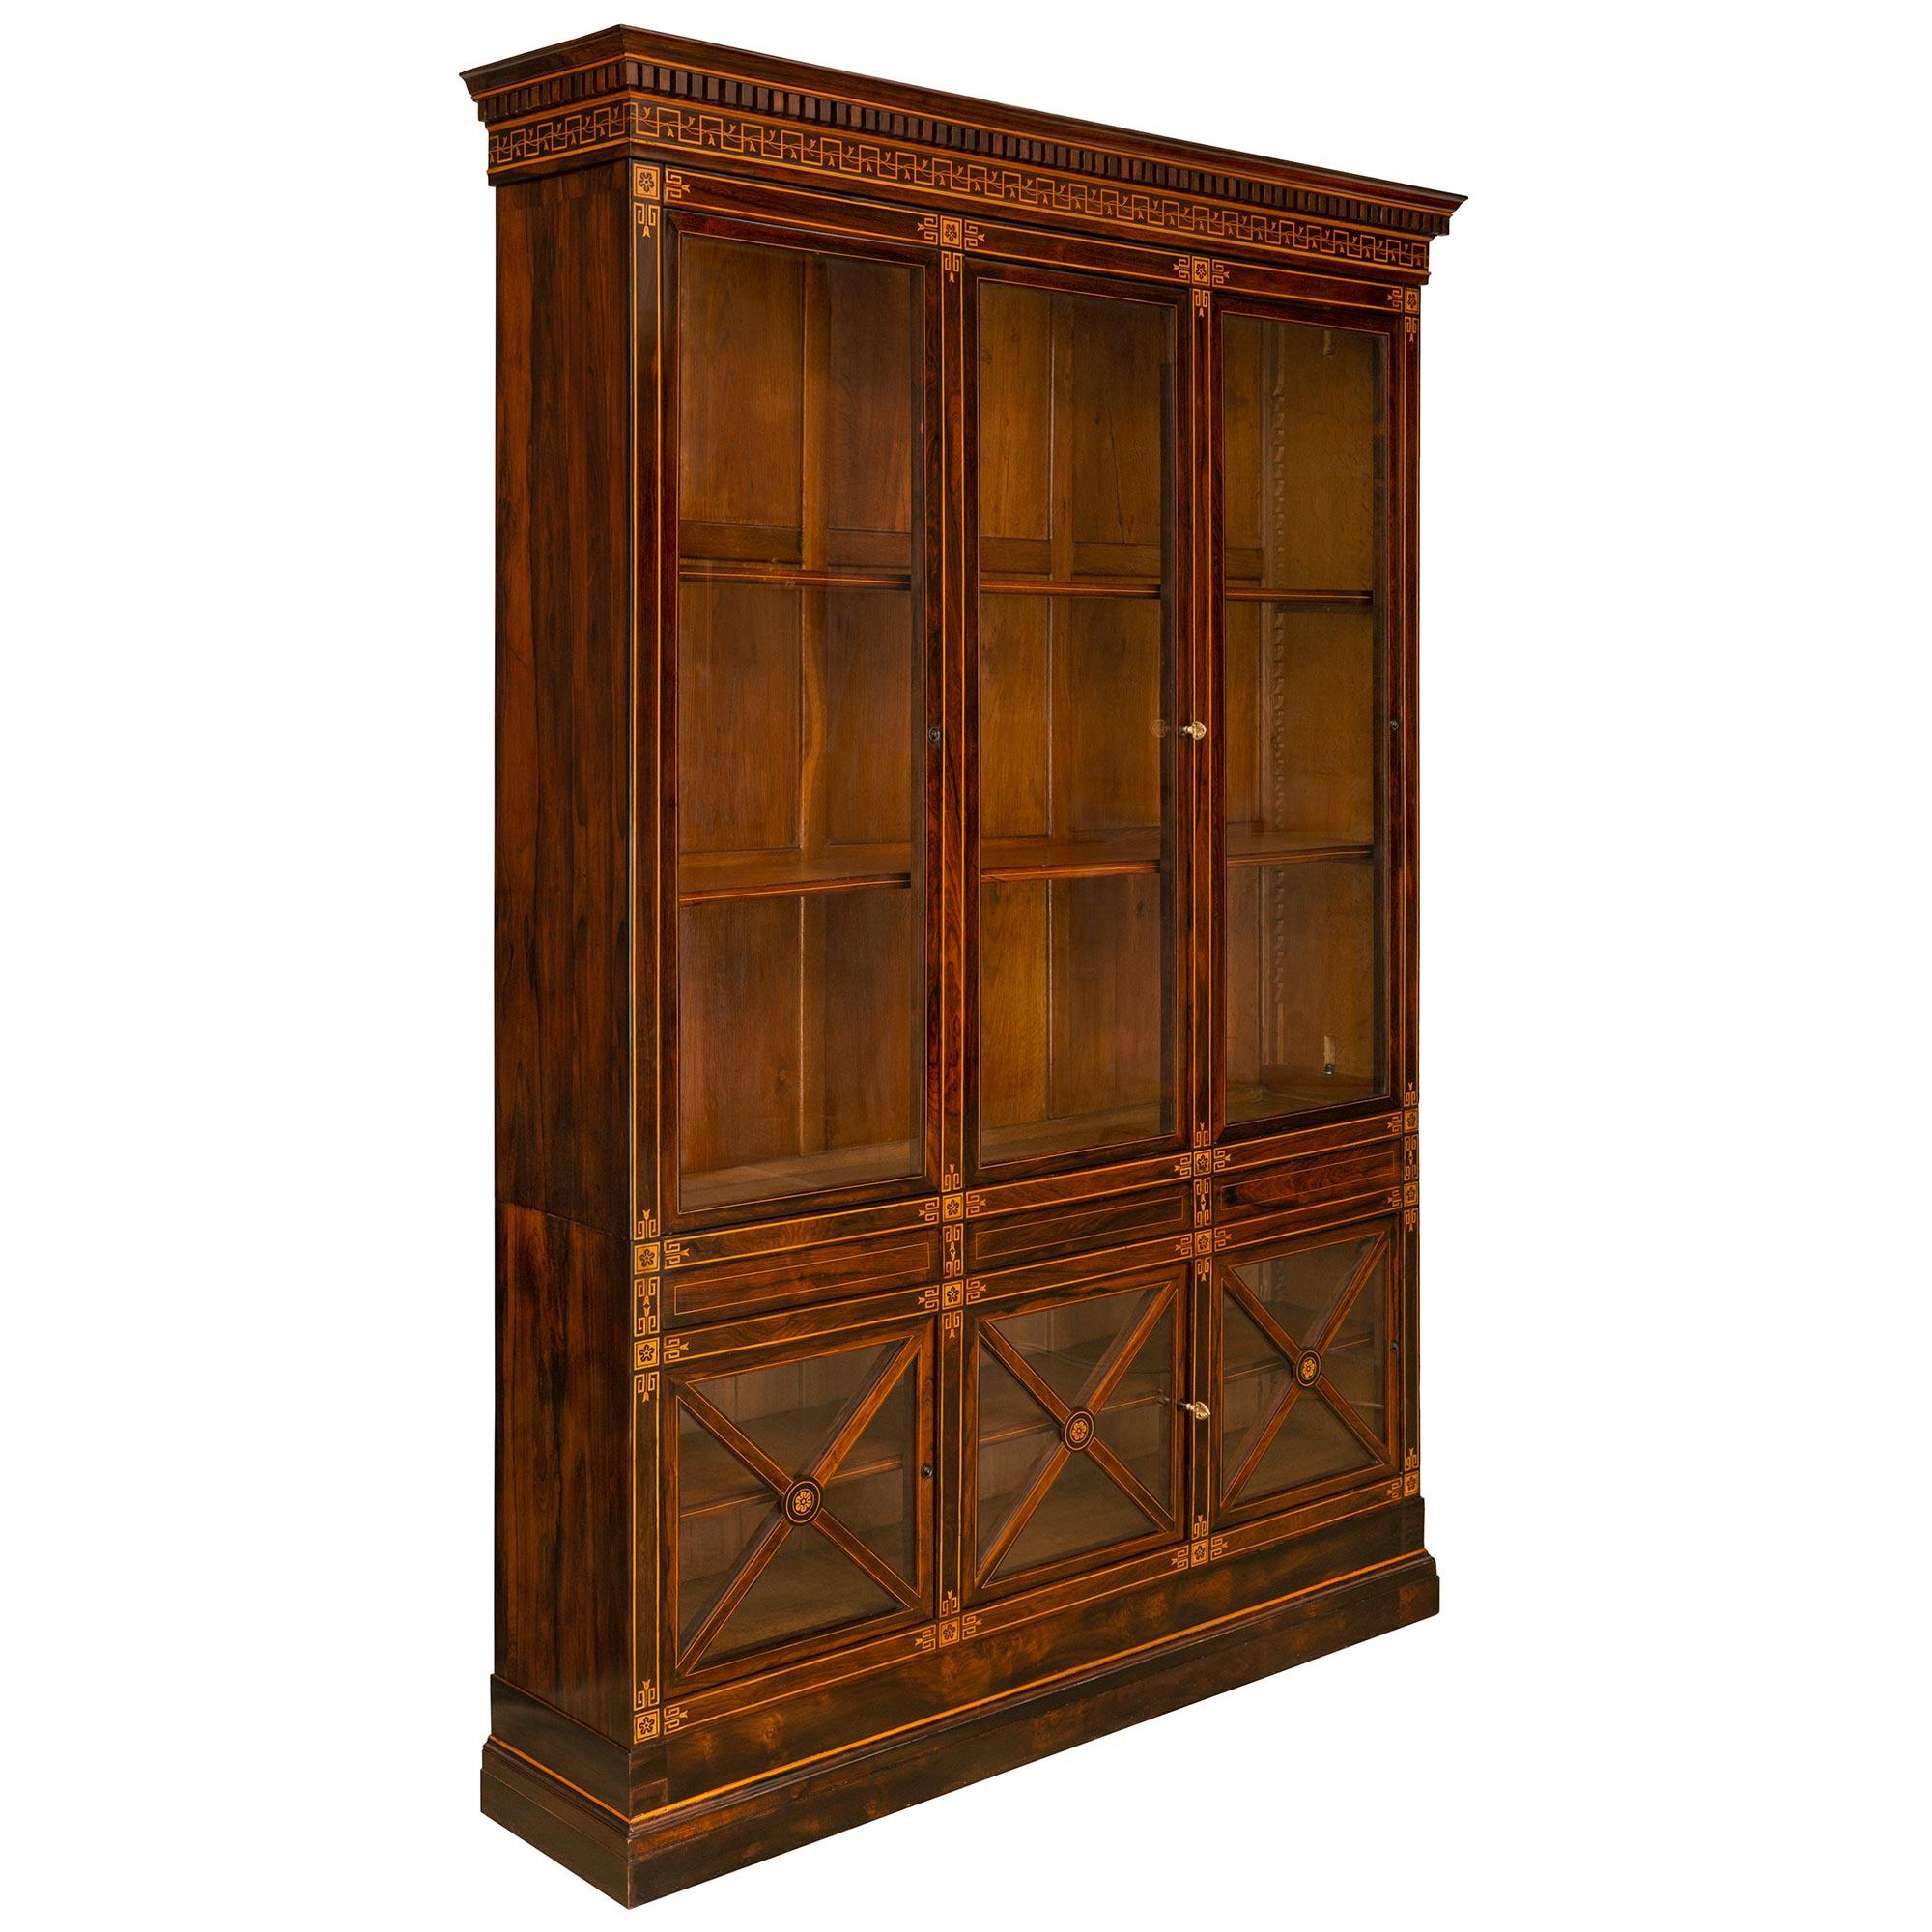 A handsome French 19th century Charles X period Rosewood and Maple bookcase/vitrine. The vitrine is raised on a mottled plinth below three square bottom glass doors displaying X designs with central rosettes and original lock surrounded by Greek key